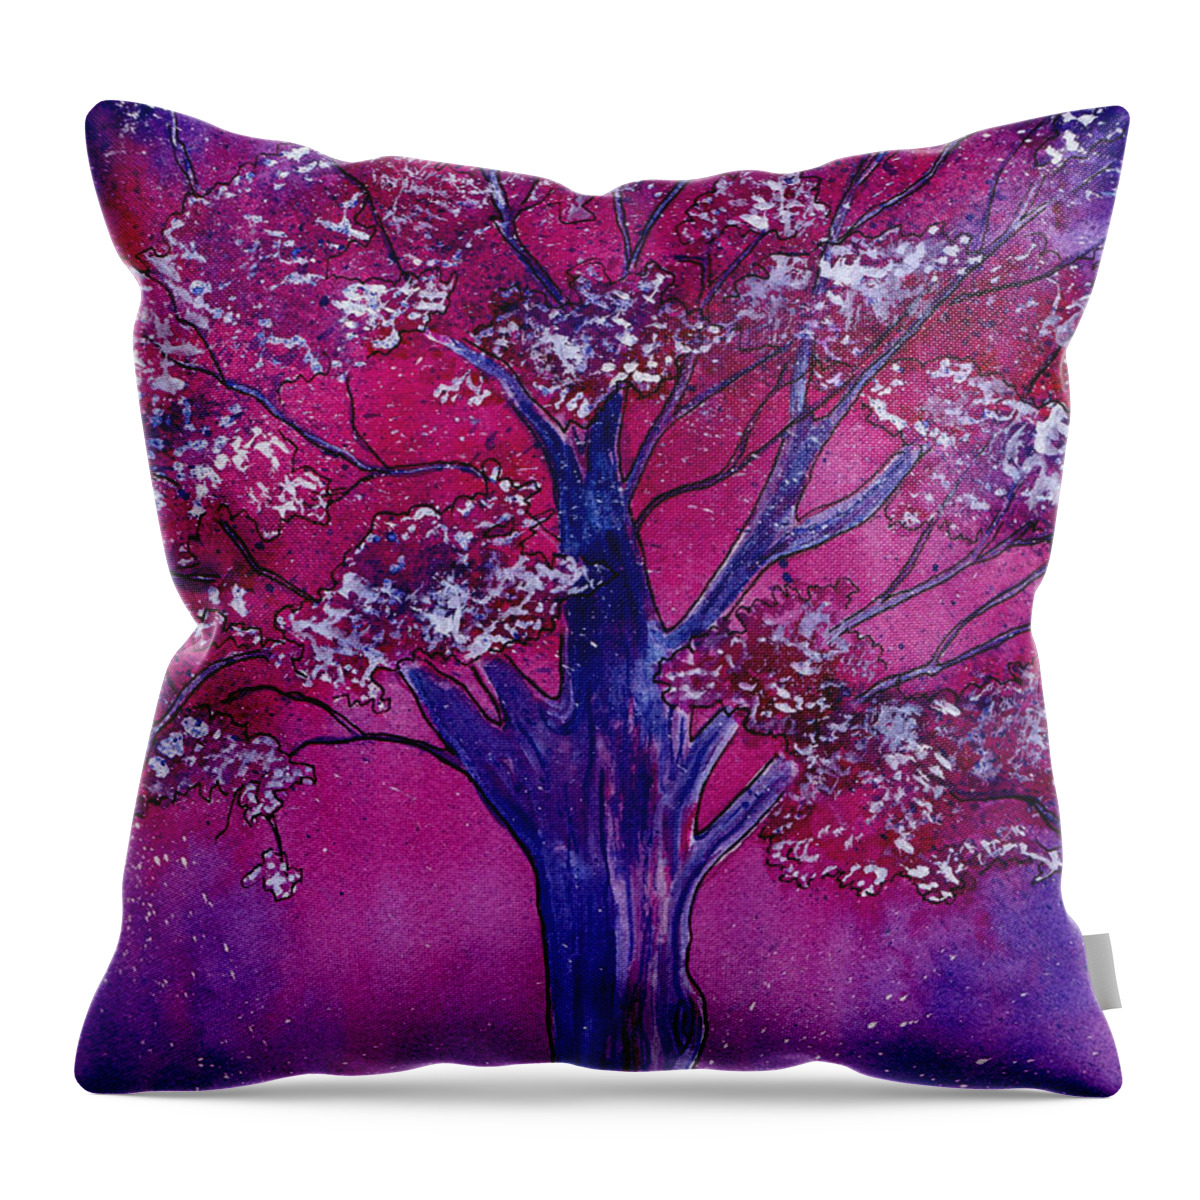 Watercolor Throw Pillow featuring the painting Pink Spring Awakening by Brenda Owen